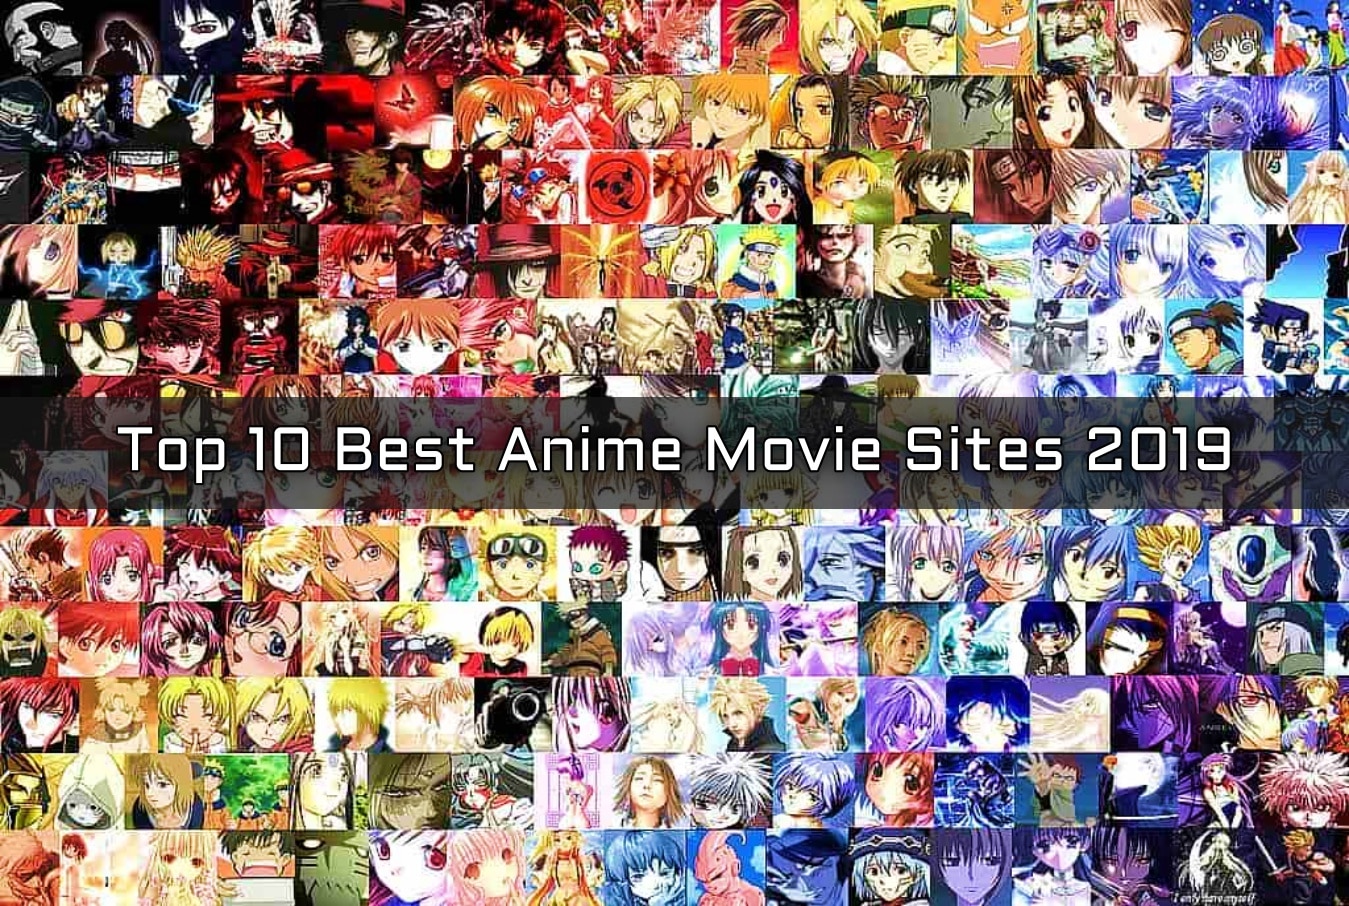 Top 10 Anime films for the family